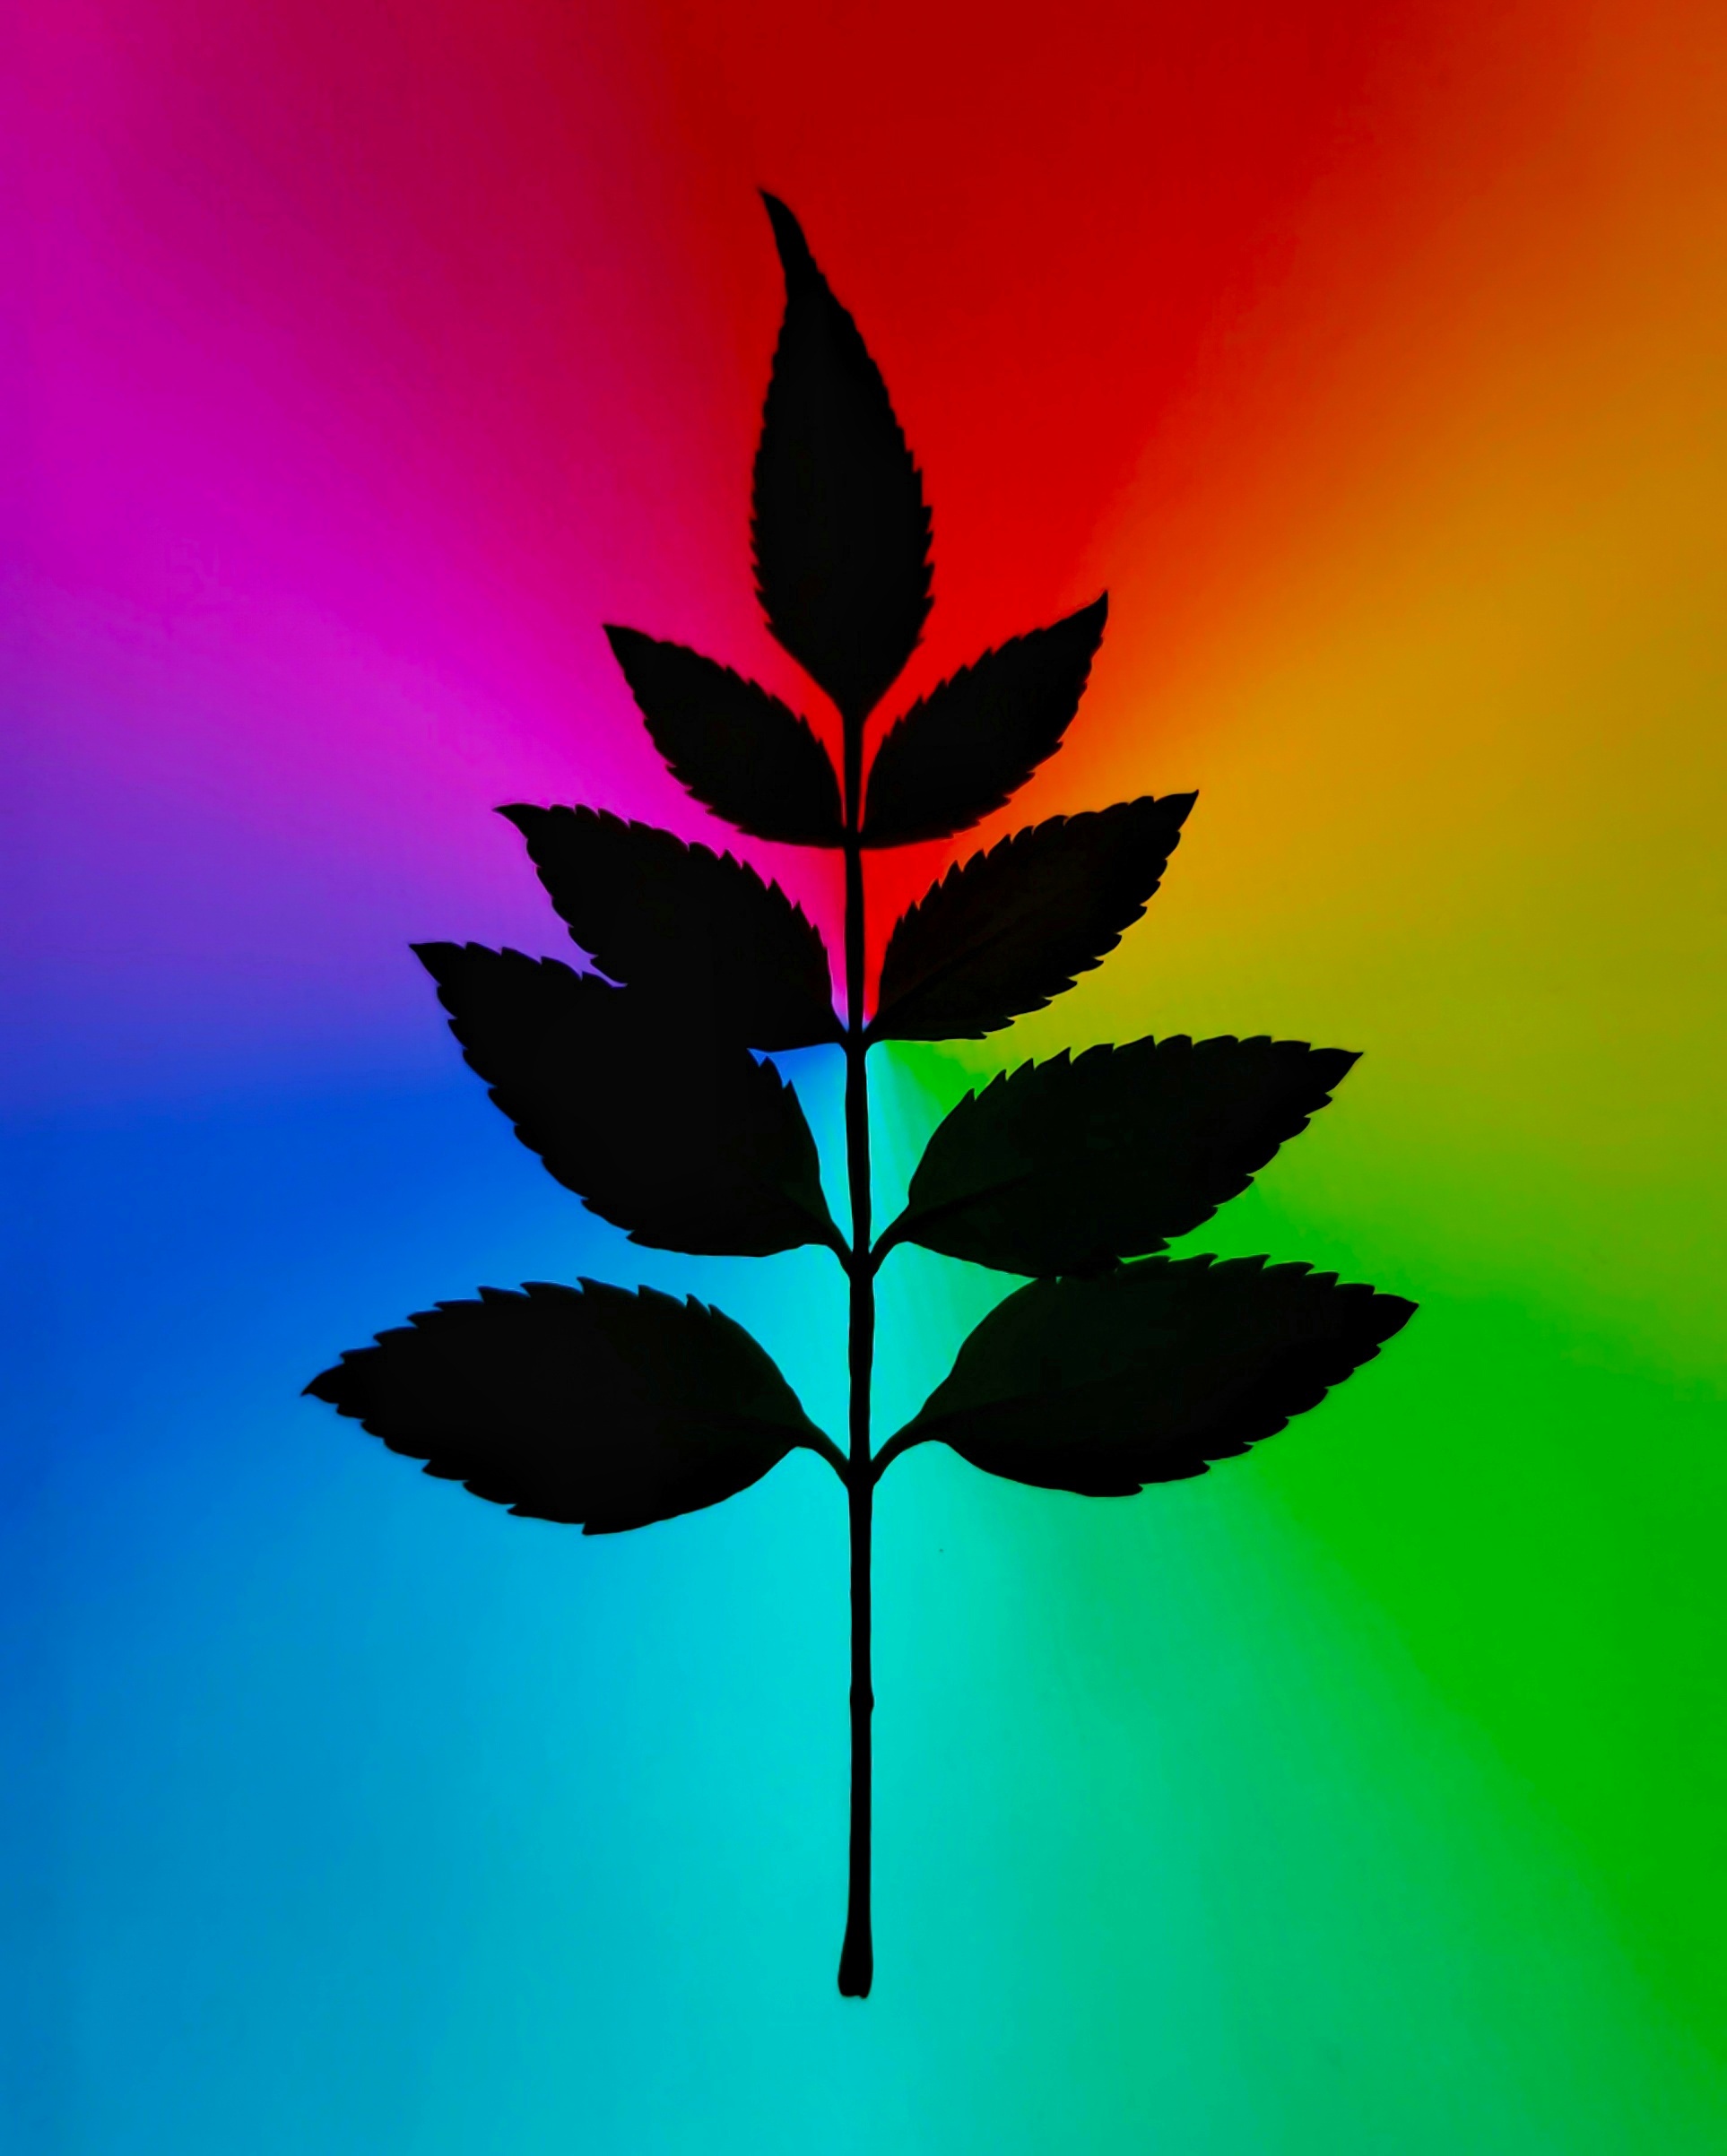 Leaf with colorful background